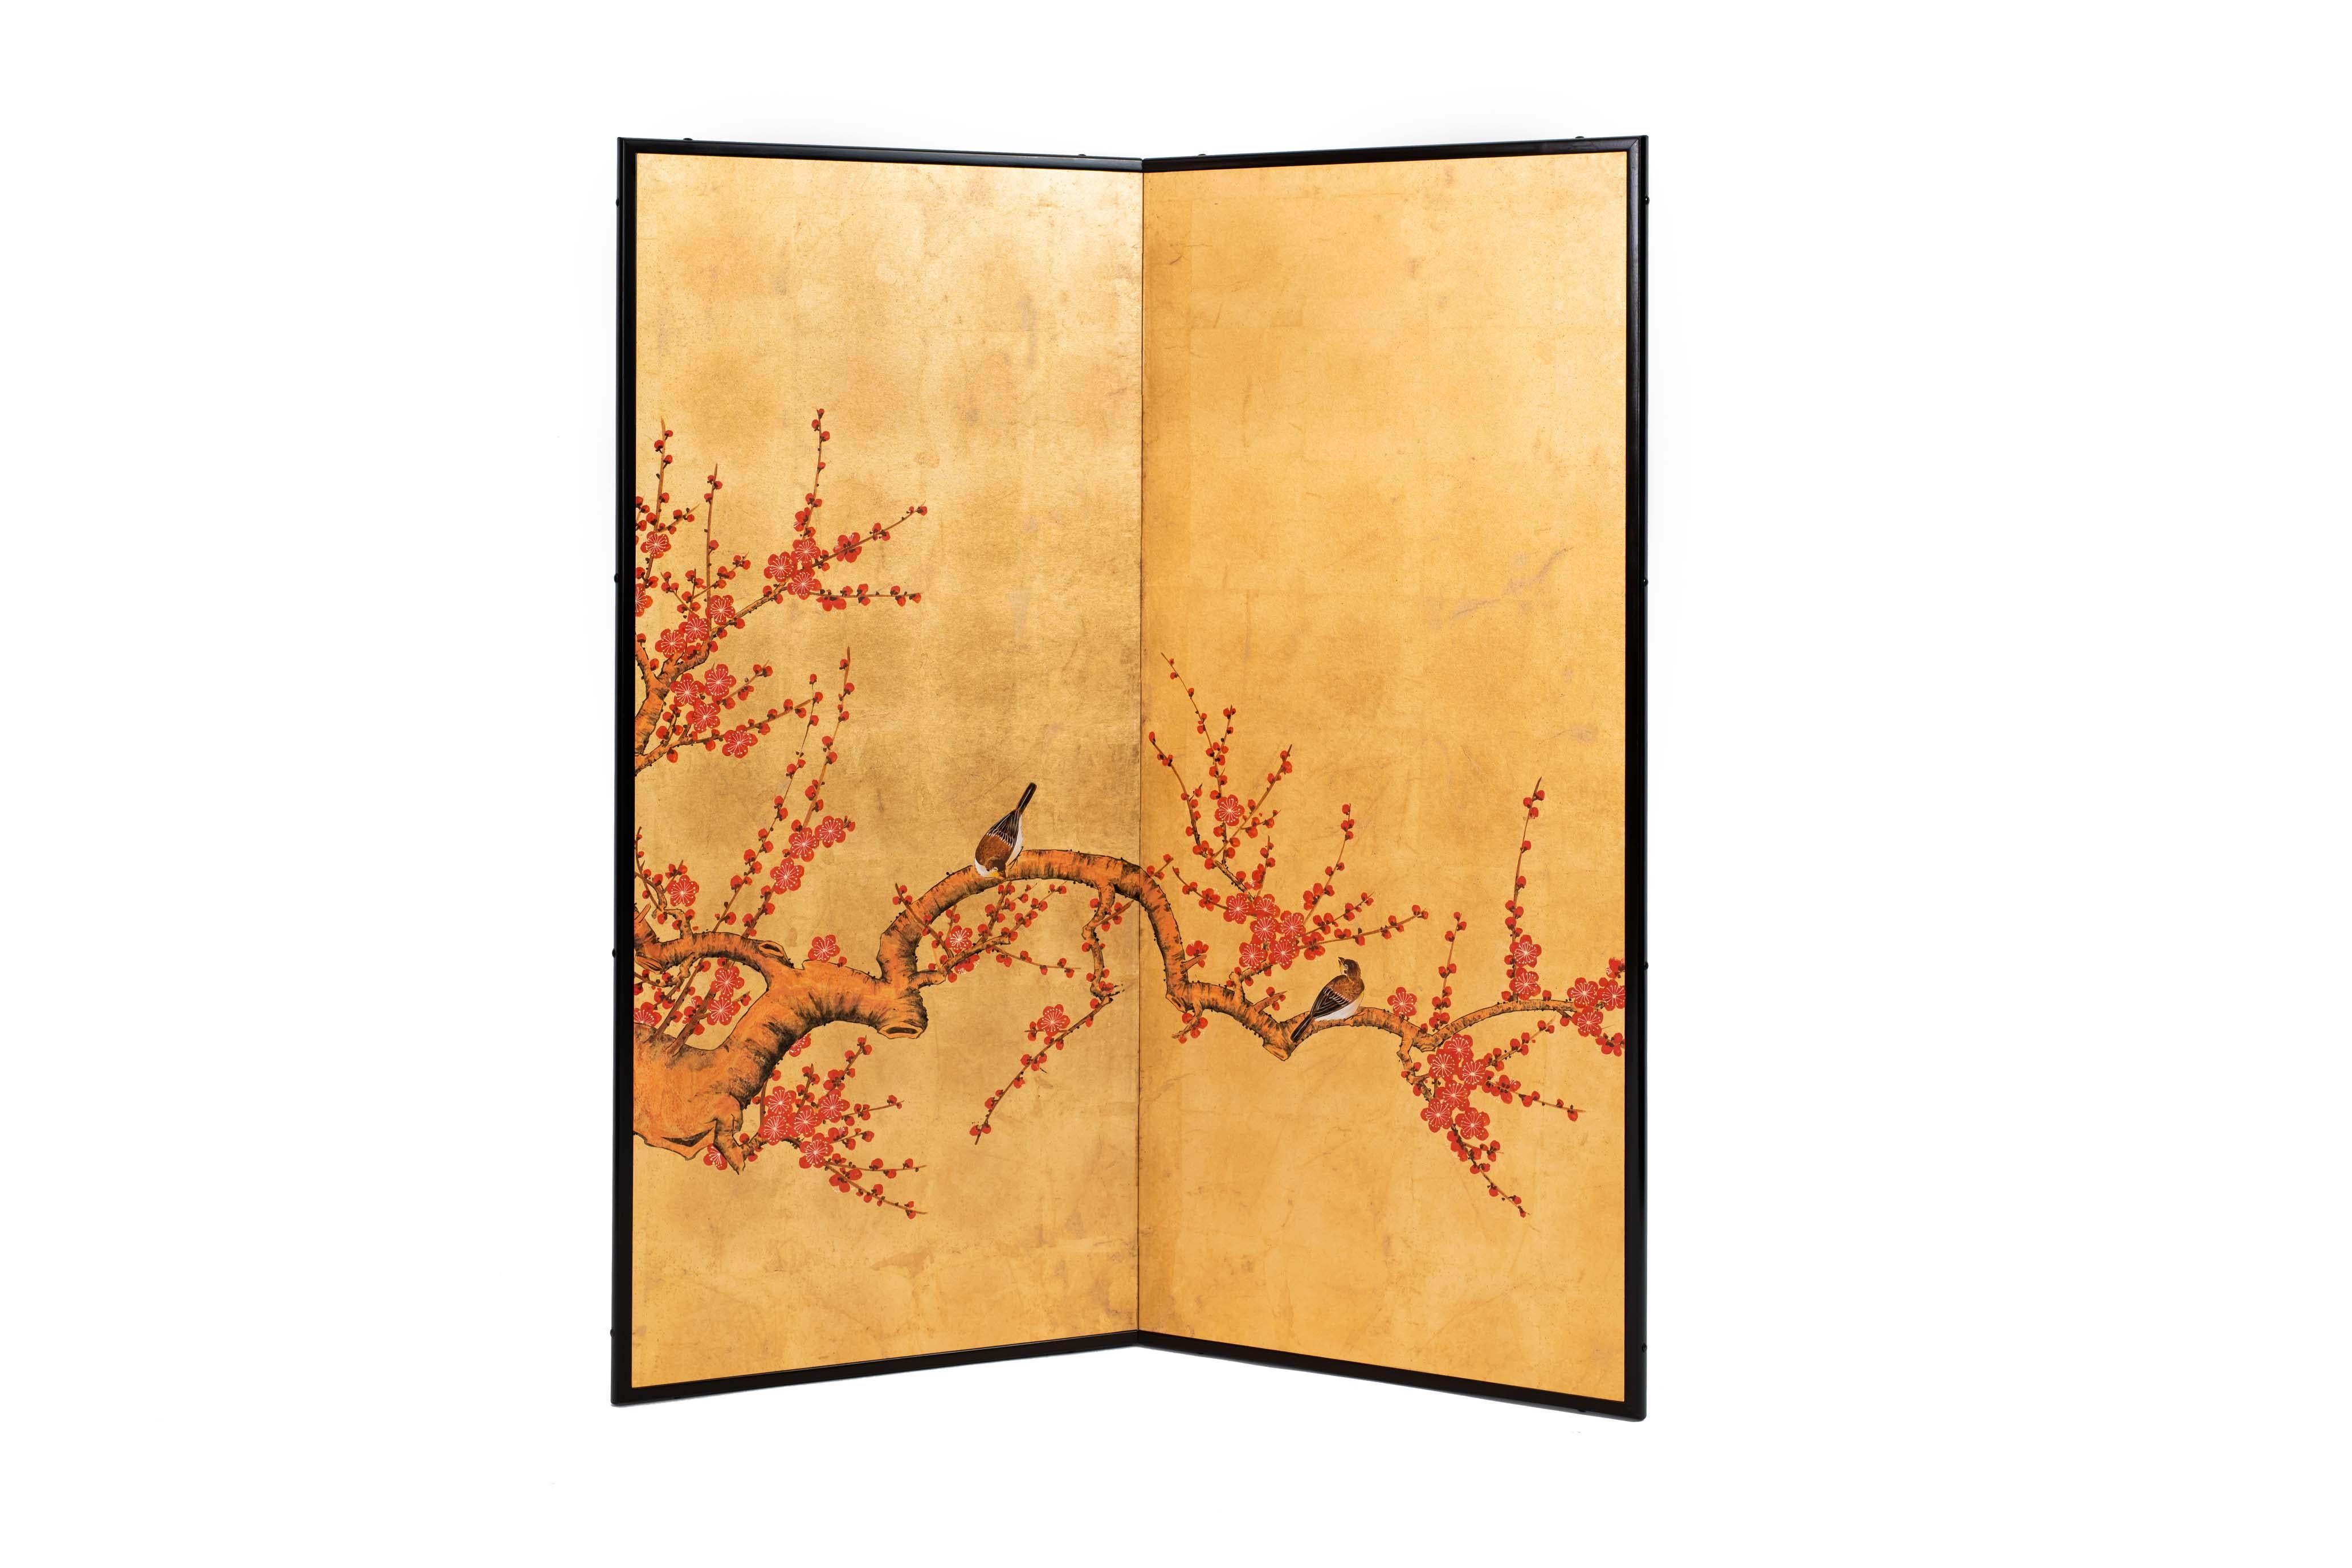 The red plum blossom and birds painting of this two-panel screen is hand-painted in watercolor, on squares of gold leaf which are applied by hand to the paper base over carefully jointed wooden lattice frames. Lacquered wooden rails are then applied